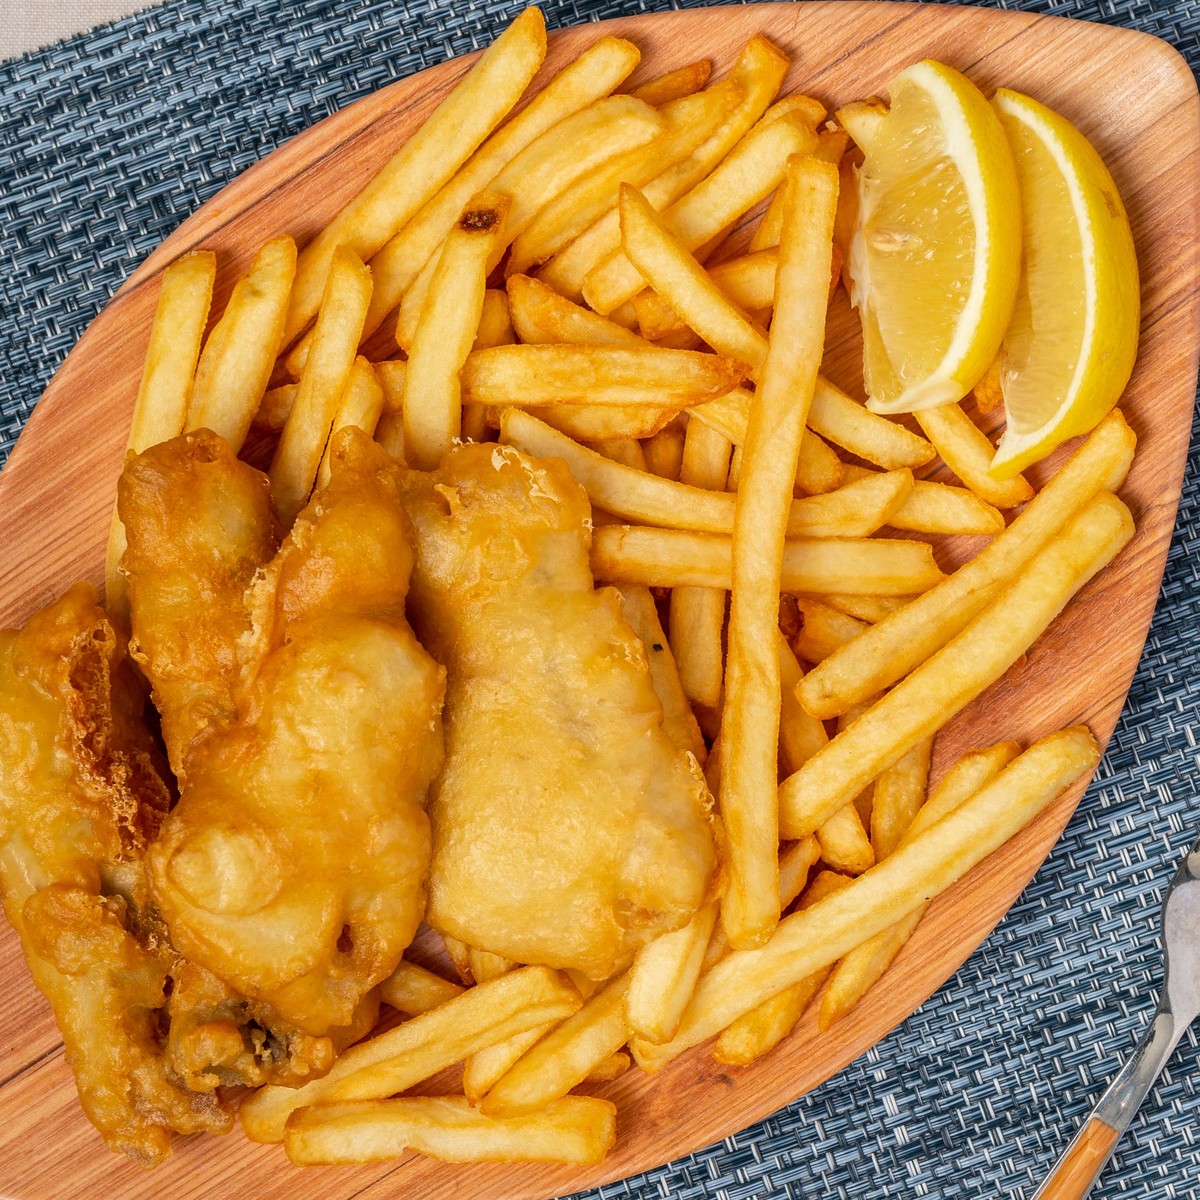 $4 Fish and Chips